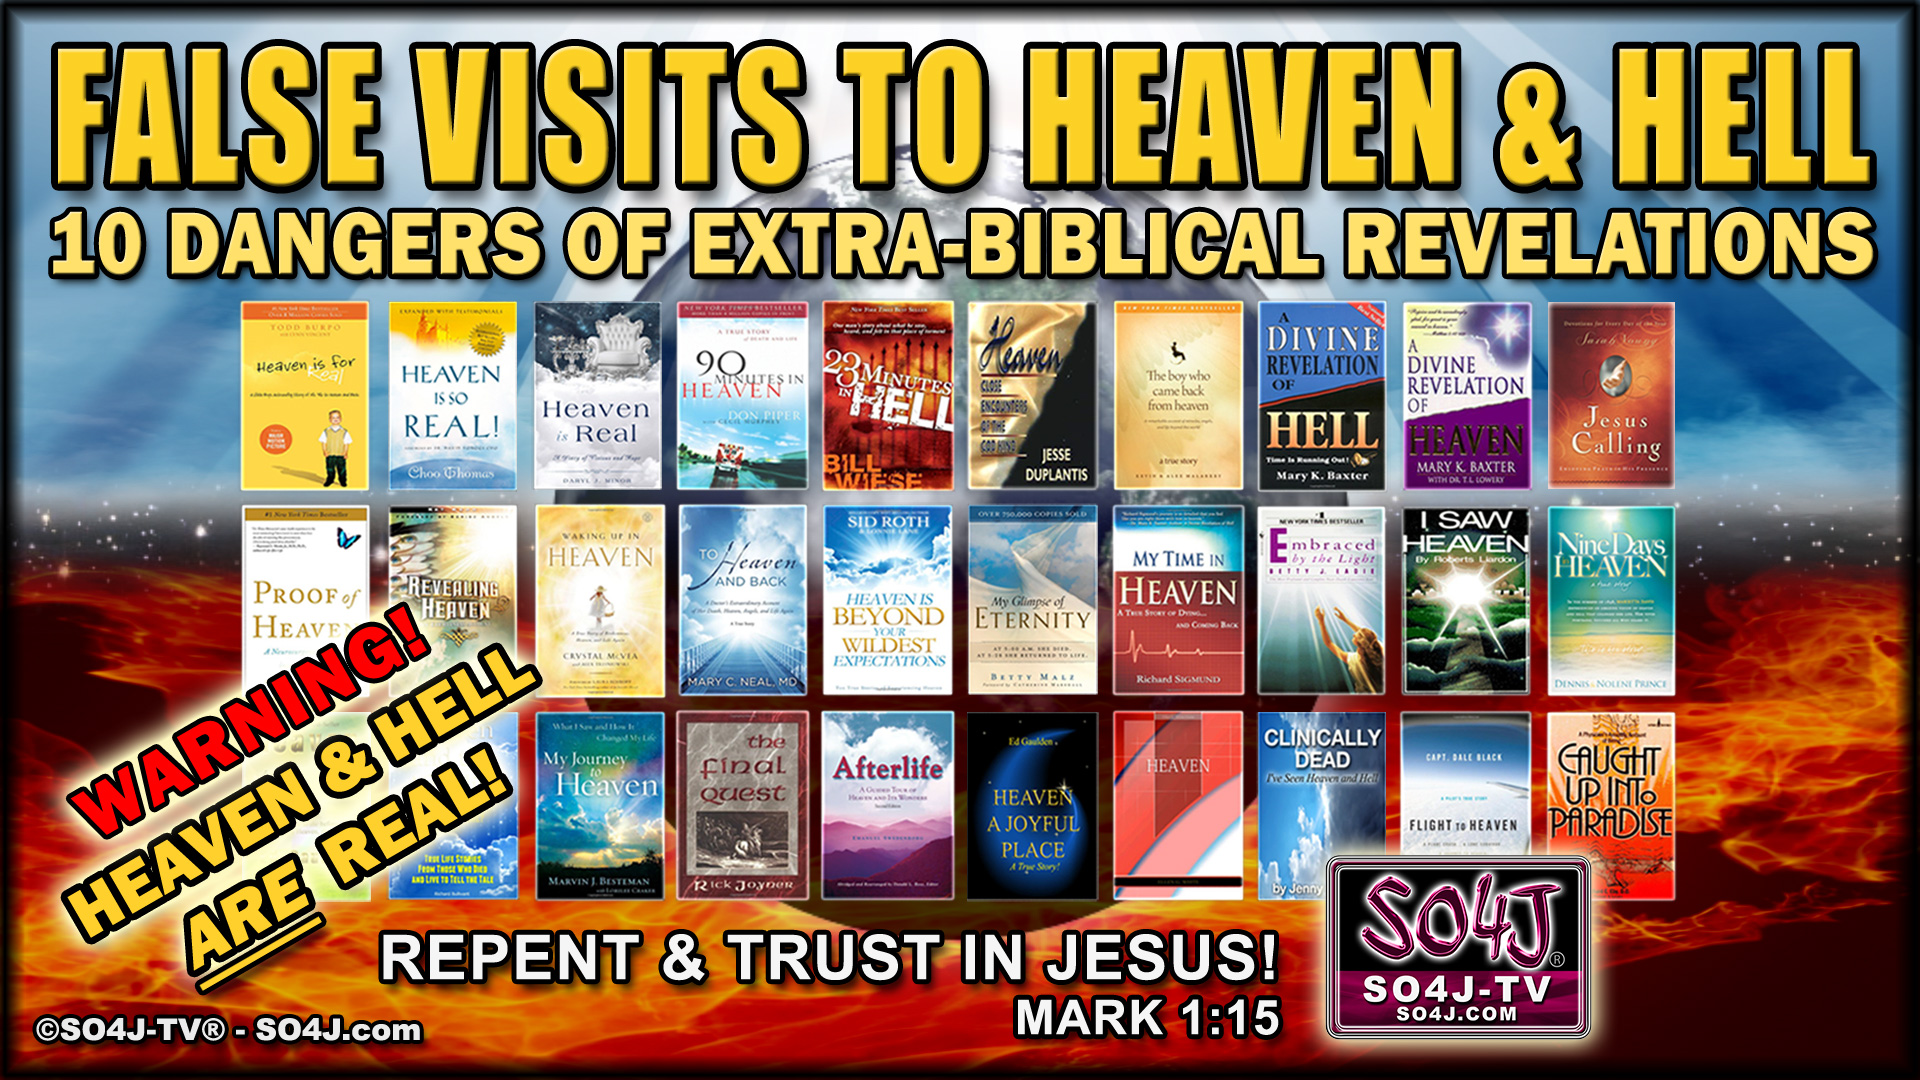 False Visits To Heaven & Hell - 10 Dangers of Extra-Biblical Revelations - SO4J-TV & Justin Peters